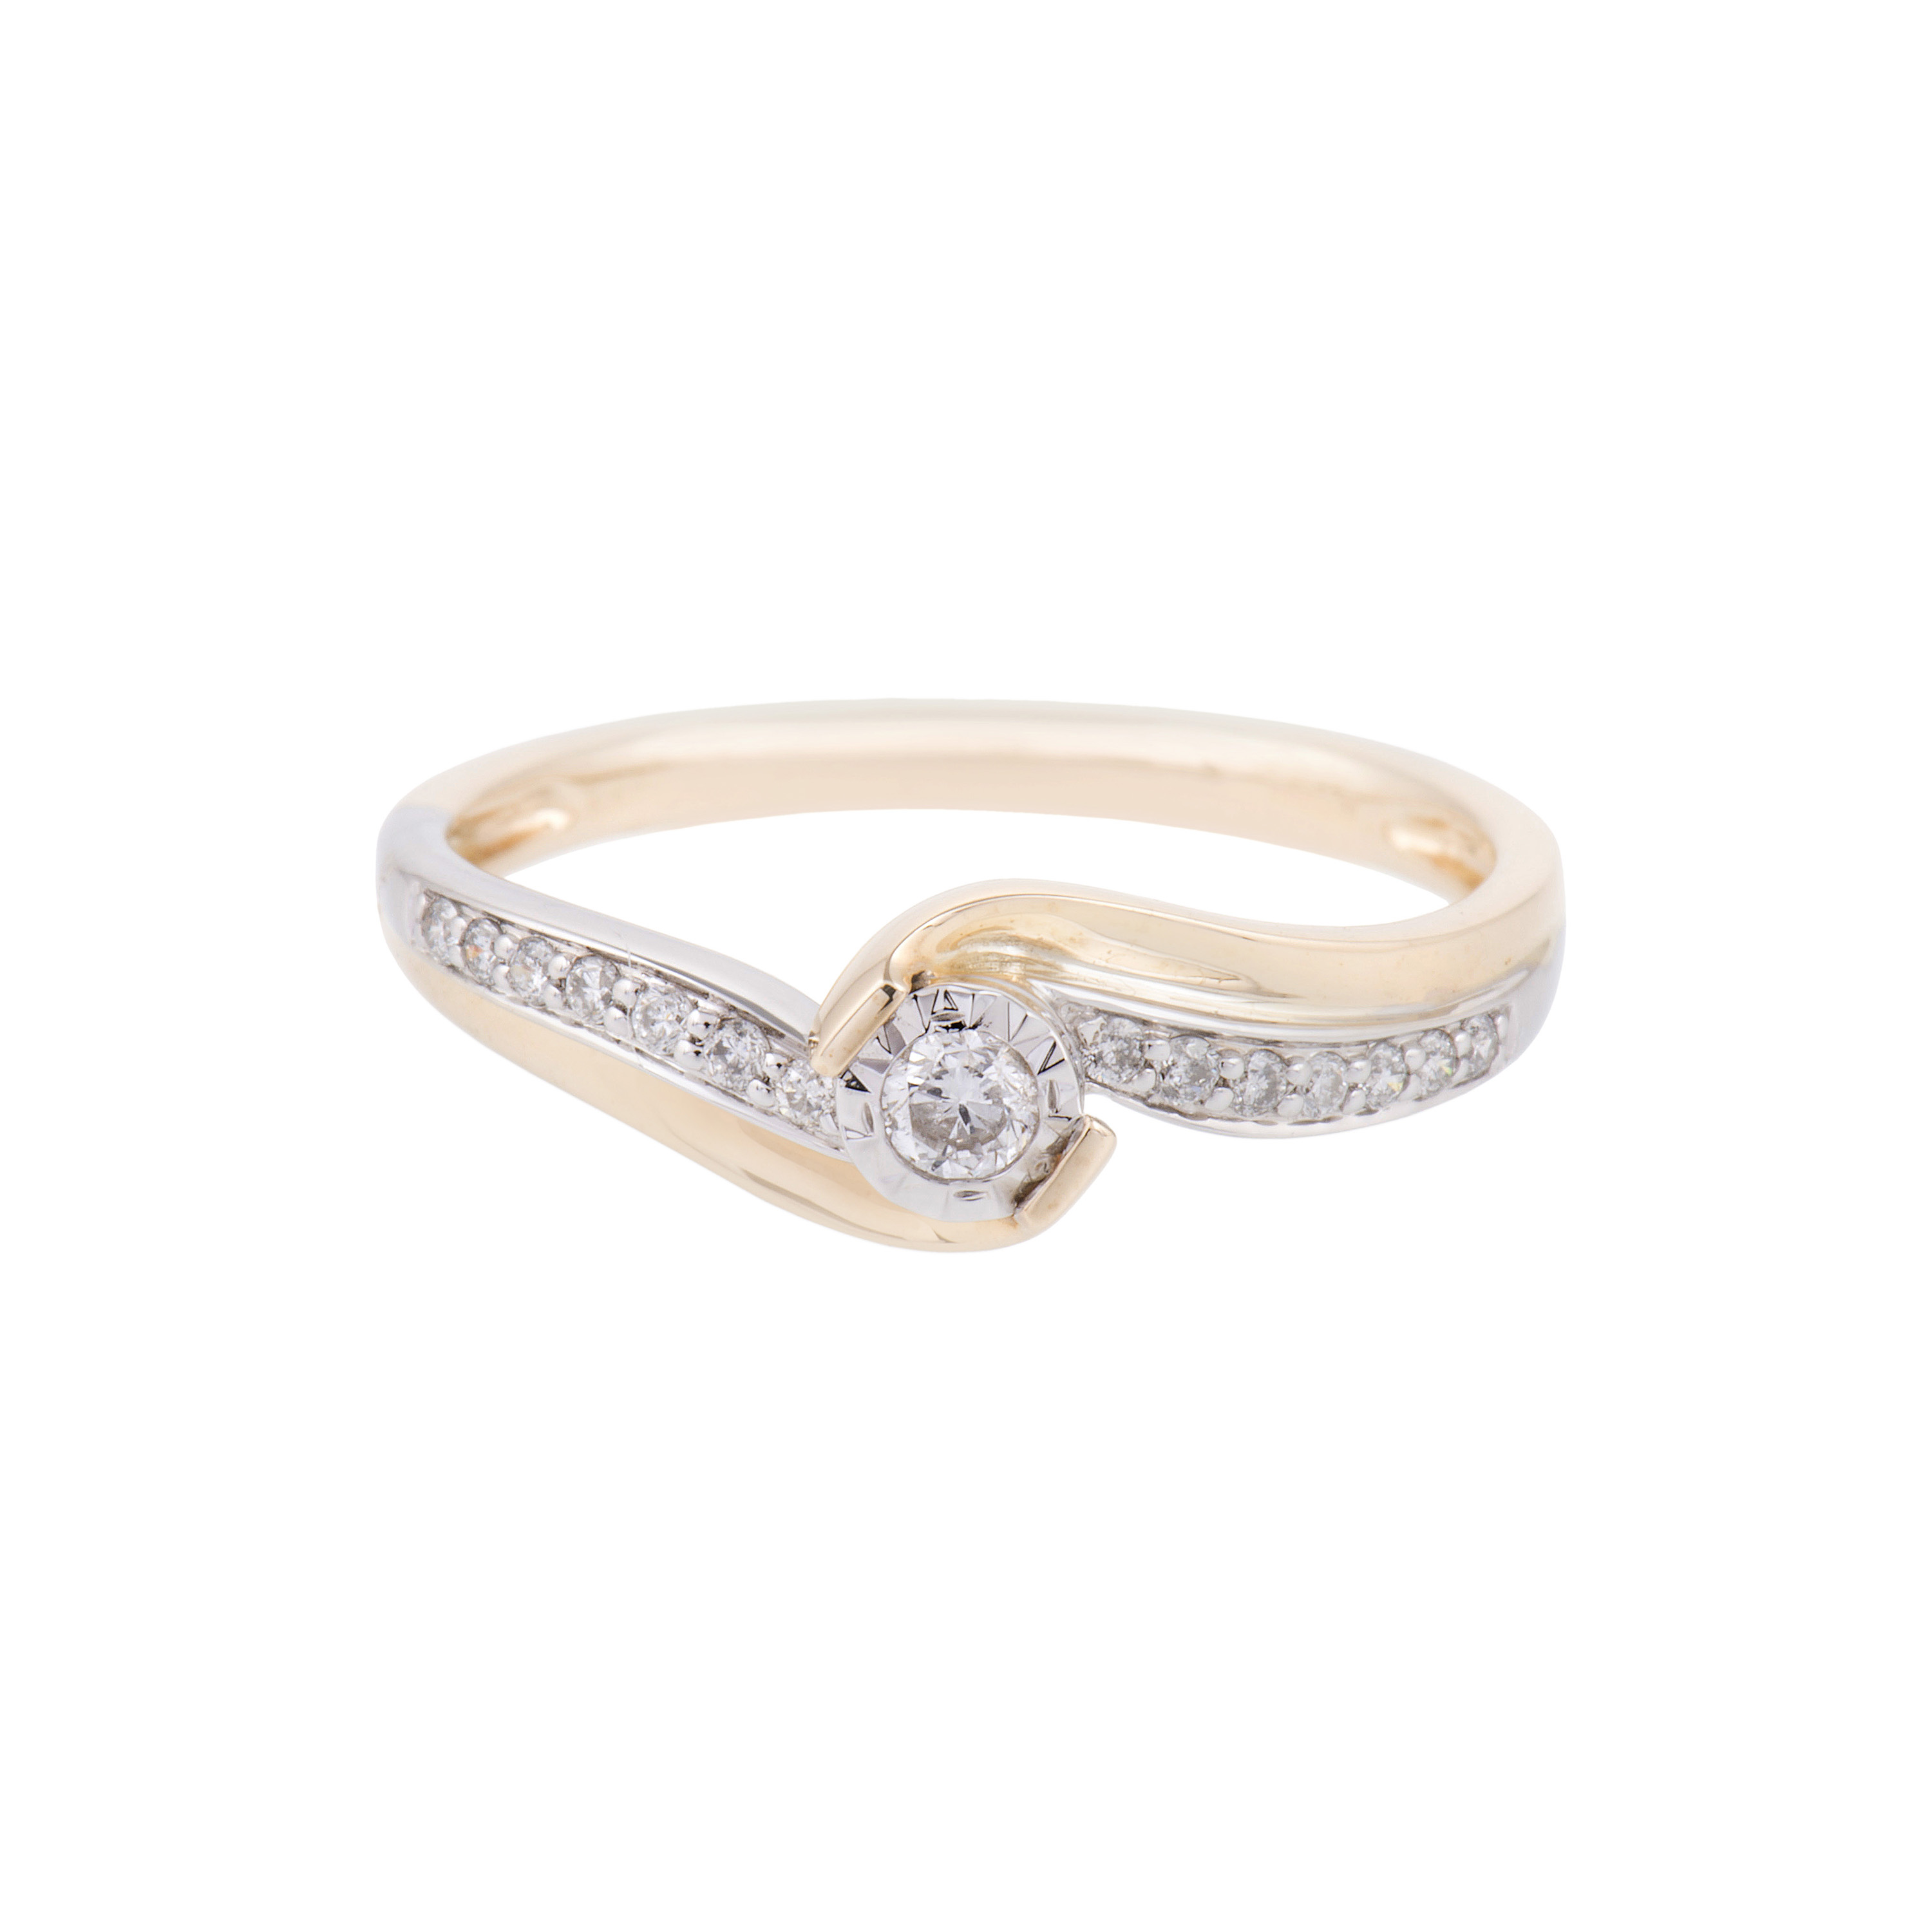 9ct Two Colour Gold Round Brilliant Diamond Solitaire with Diamond Shoulders, Approx. 0.15ct Total Weight